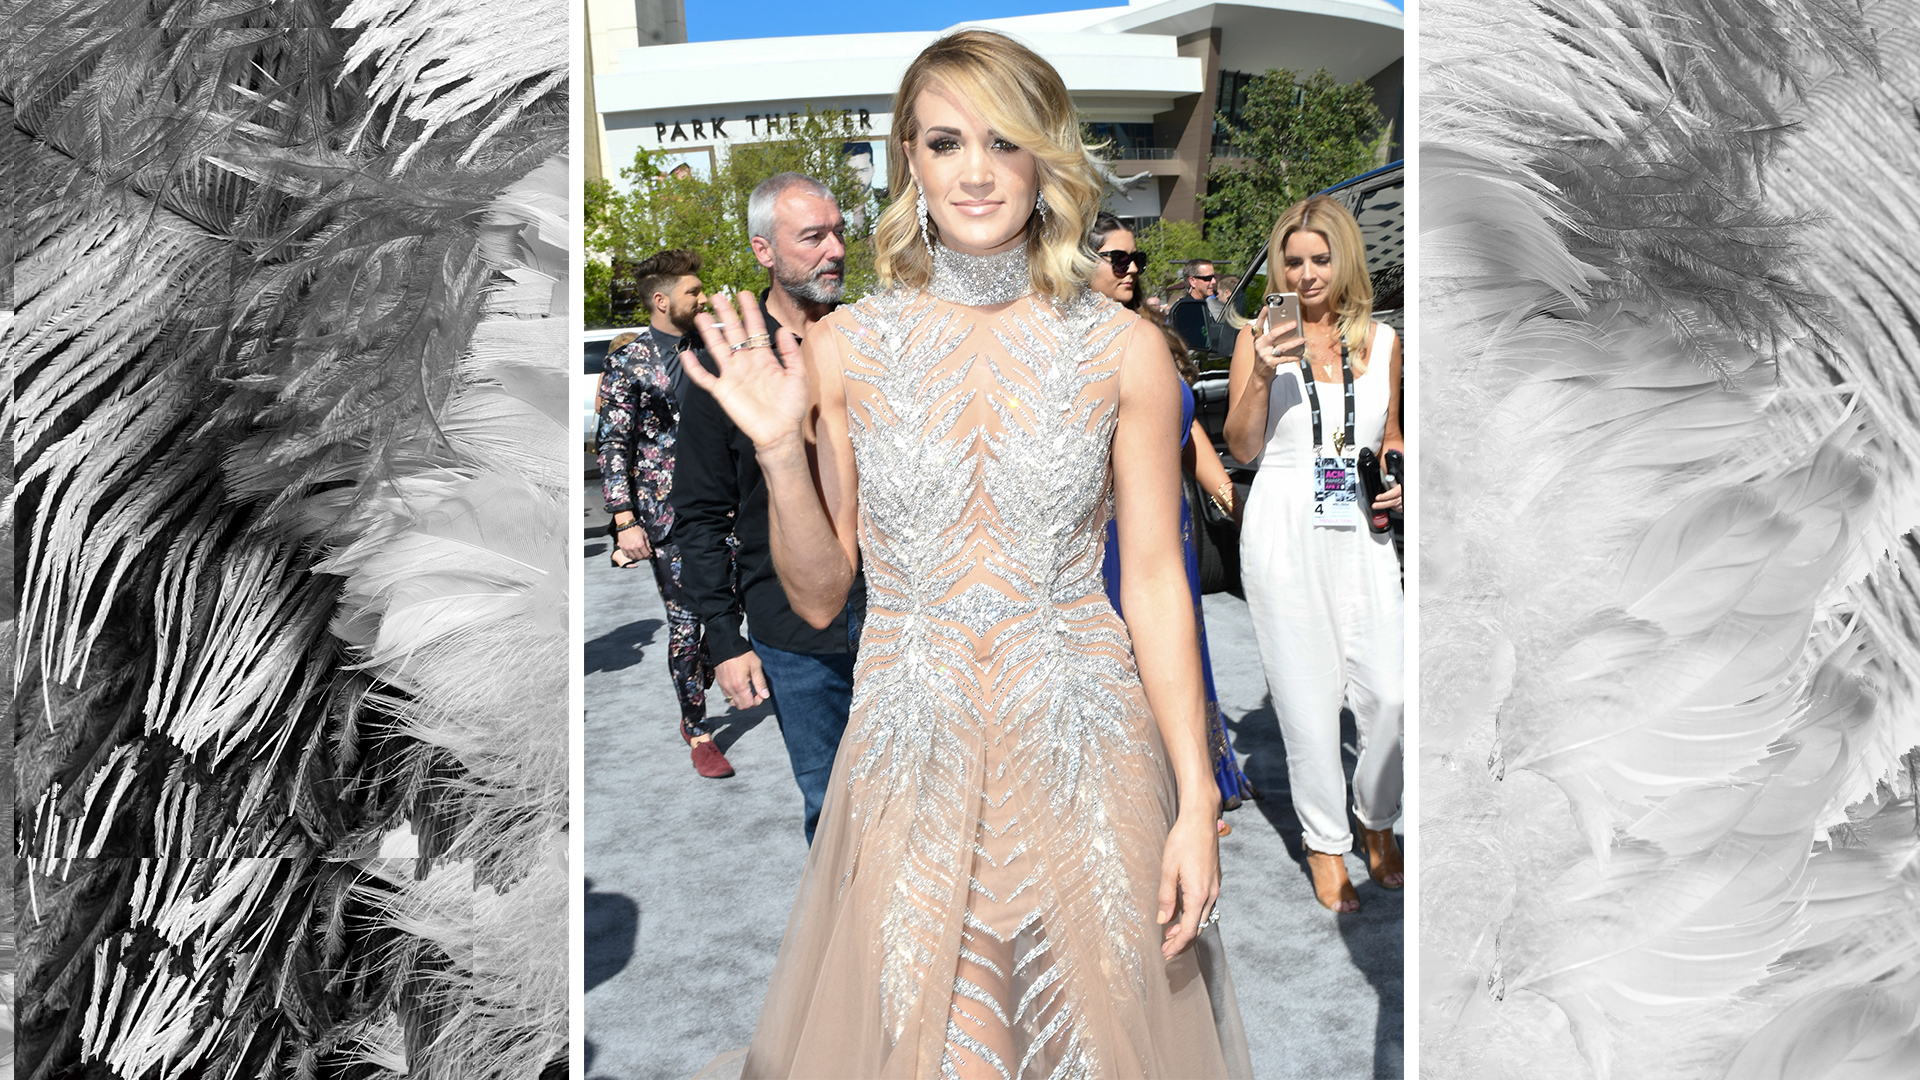 Carrie Underwood is a vision in a high-collared bedazzled gown.